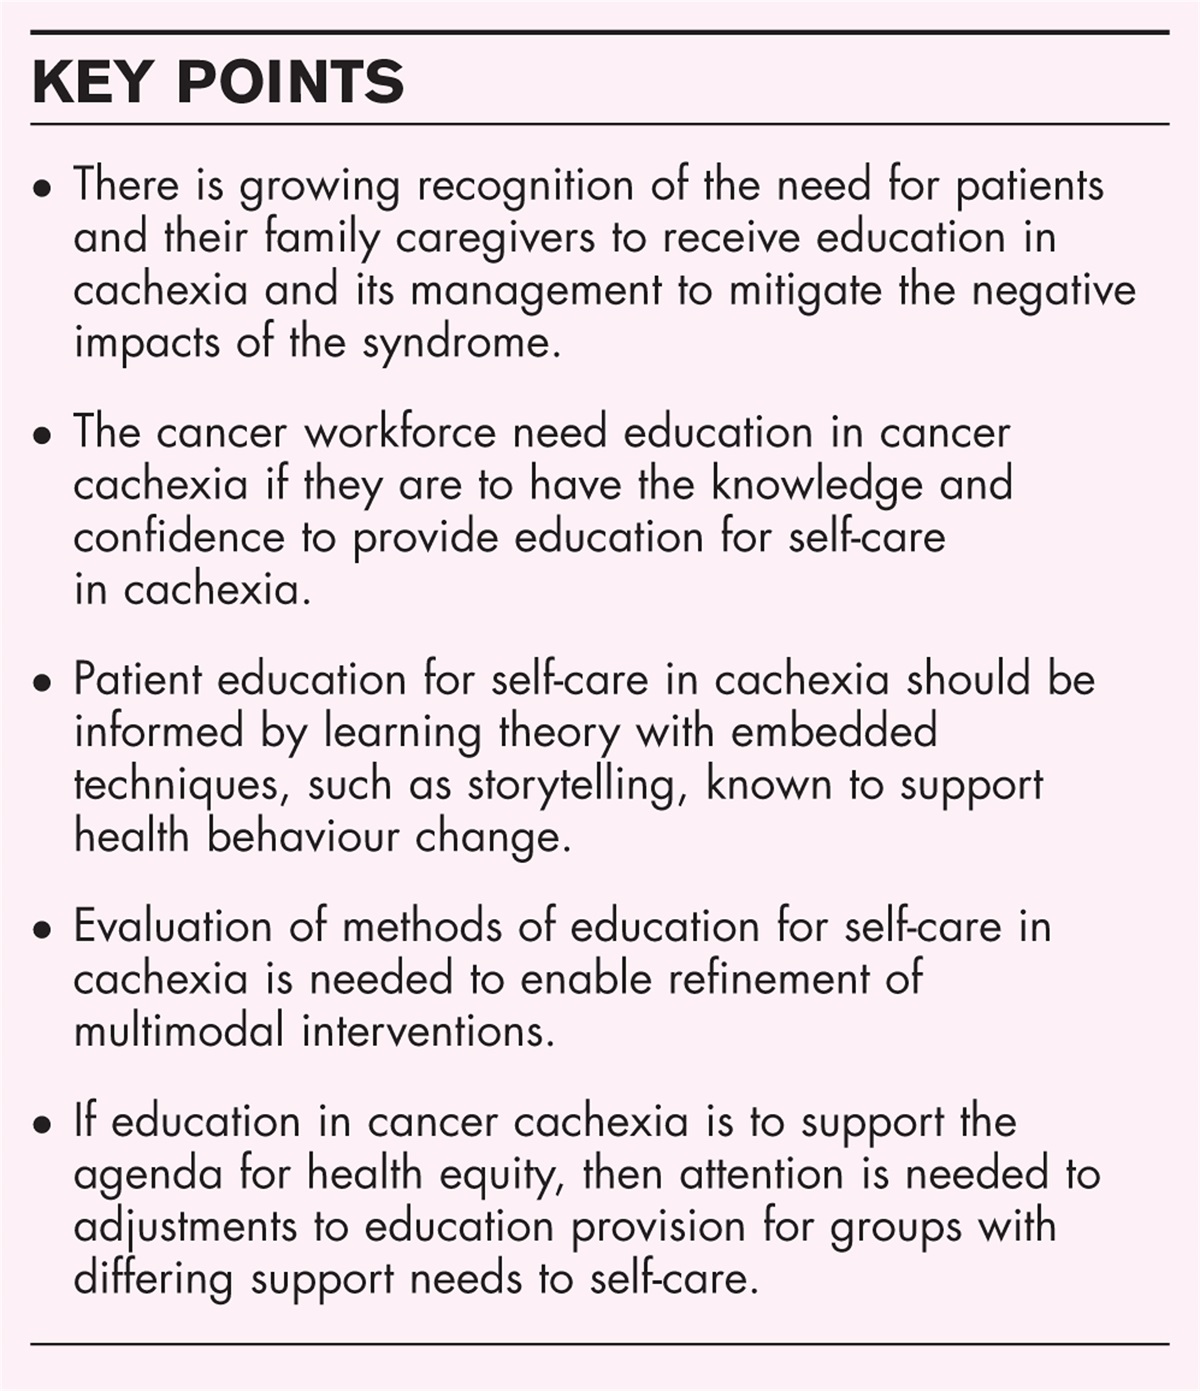 Educational needs of self-care in cachectic cancer patients and caregivers